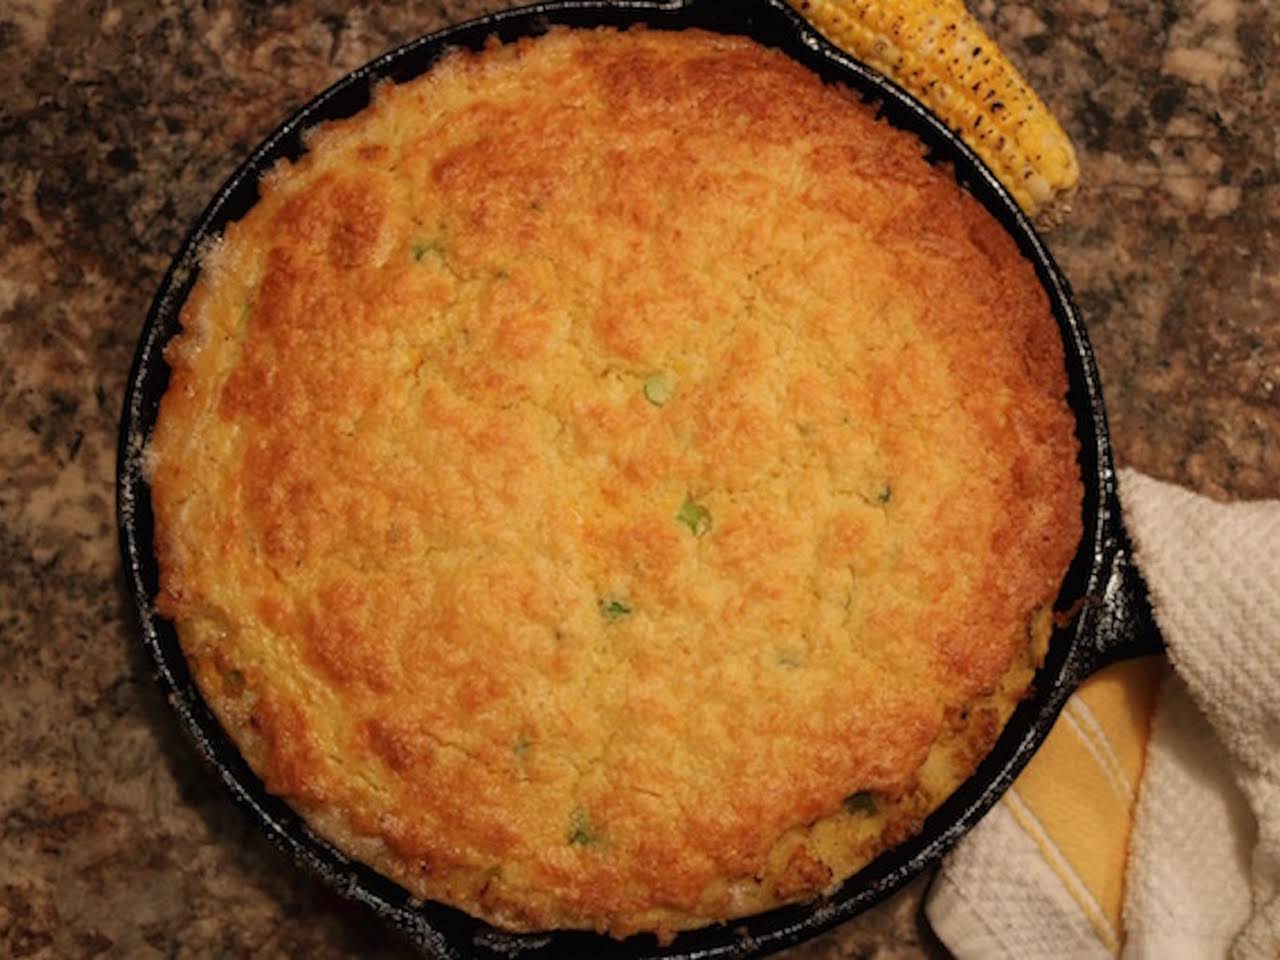 Southern Cornbread Recipe (Without Buttermilk) – State of Dinner